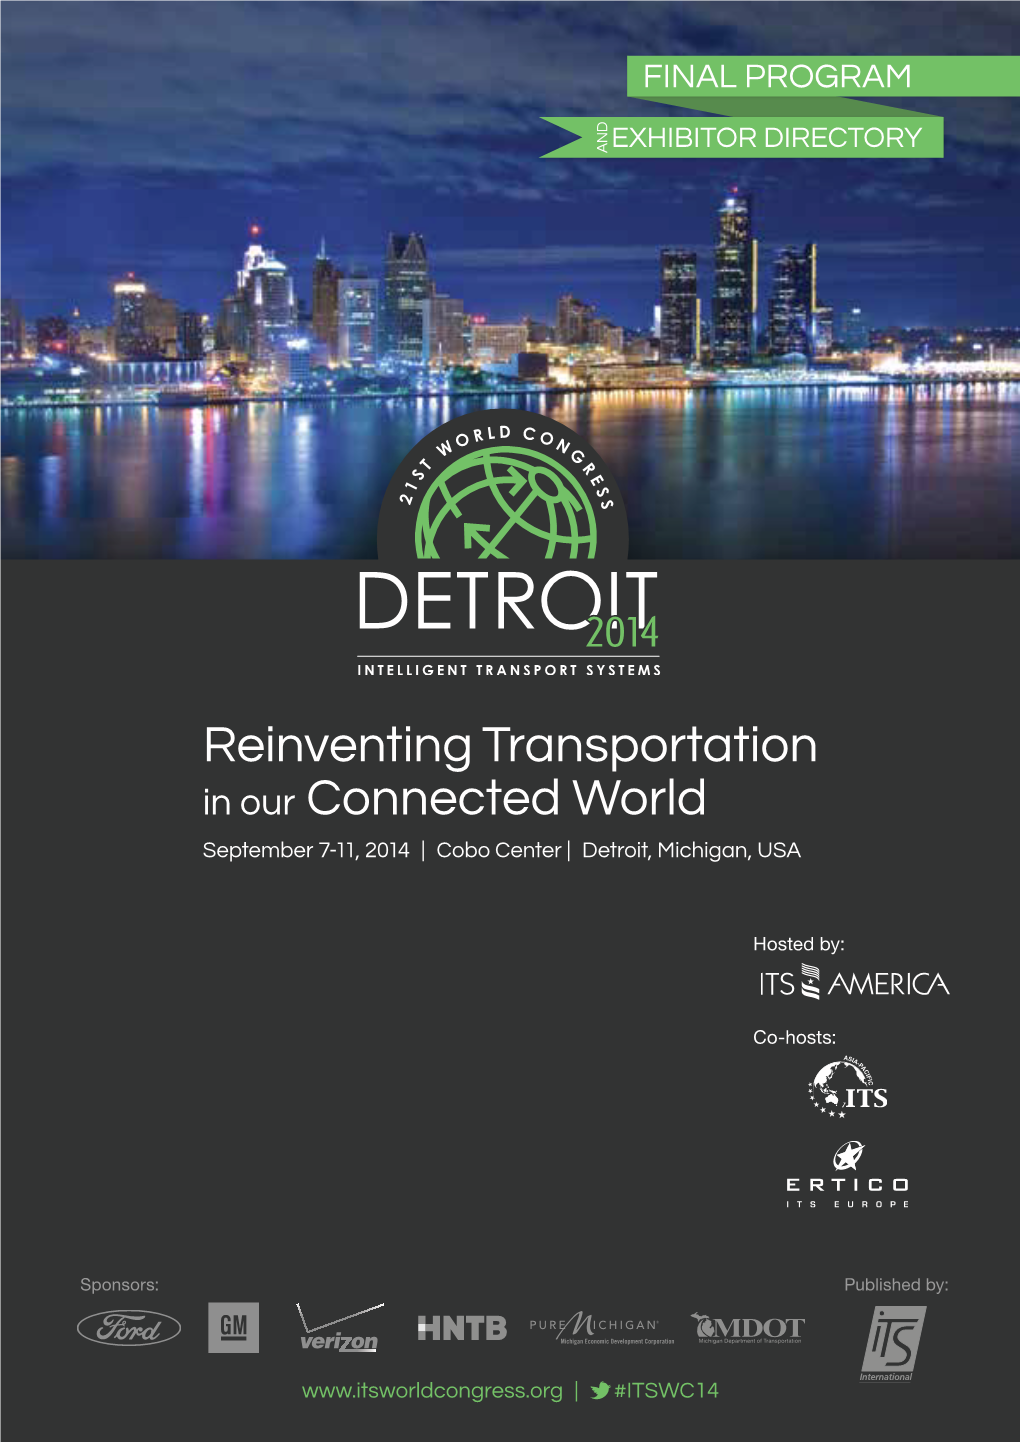 Reinventing Transportation in Our Connected World September 7-11, 2014 | Cobo Center | Detroit, Michigan, USA